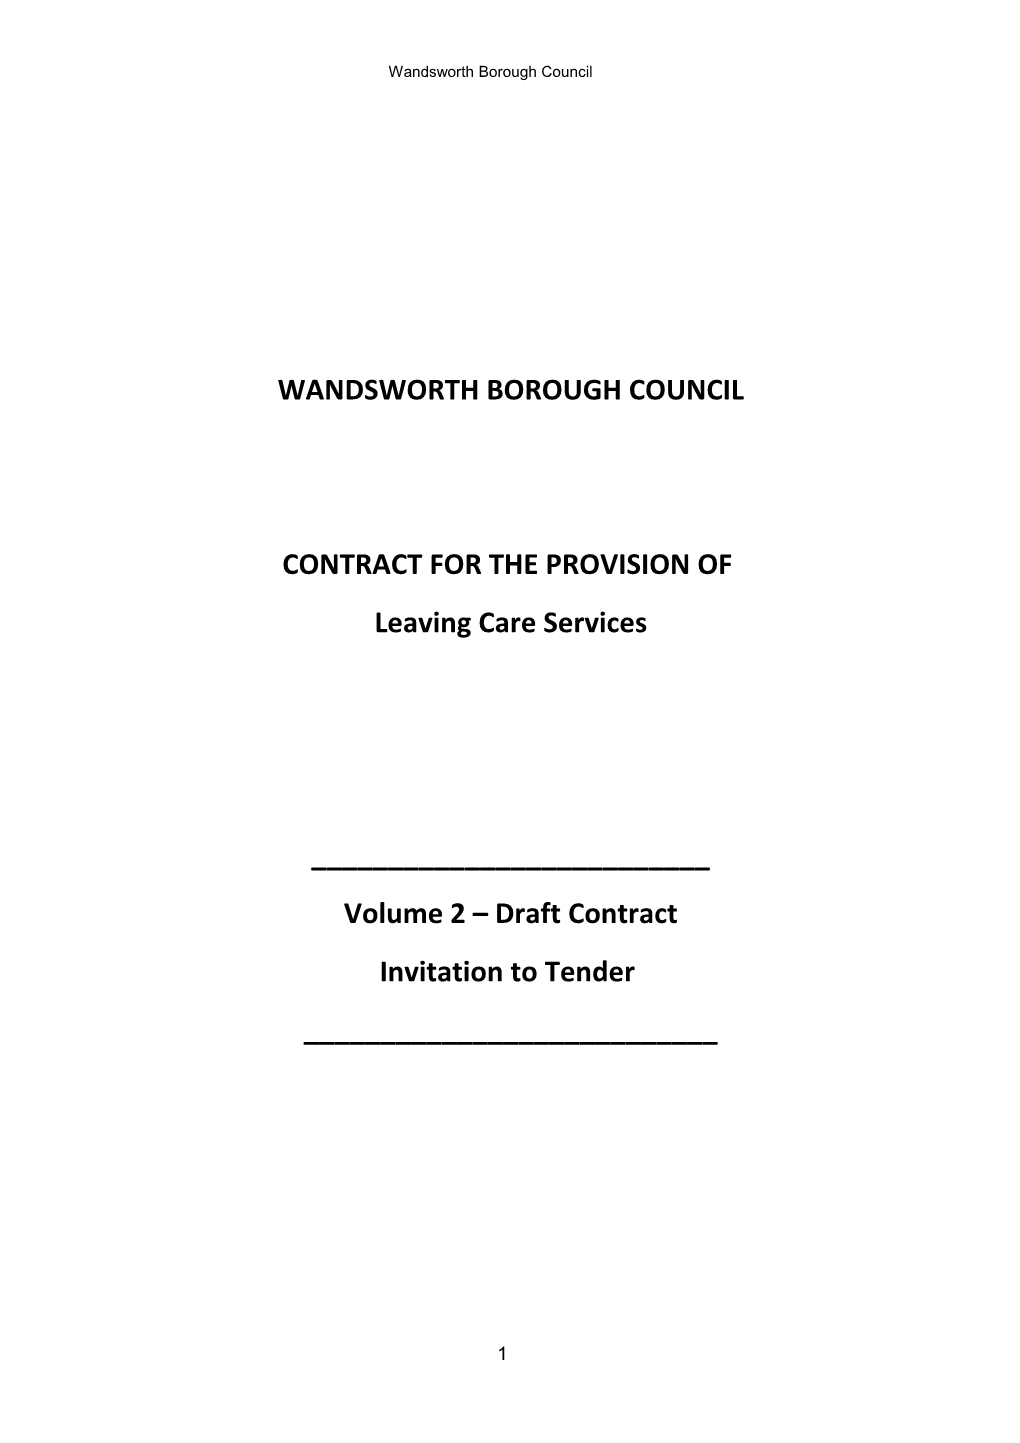 Contract for the Provision Of